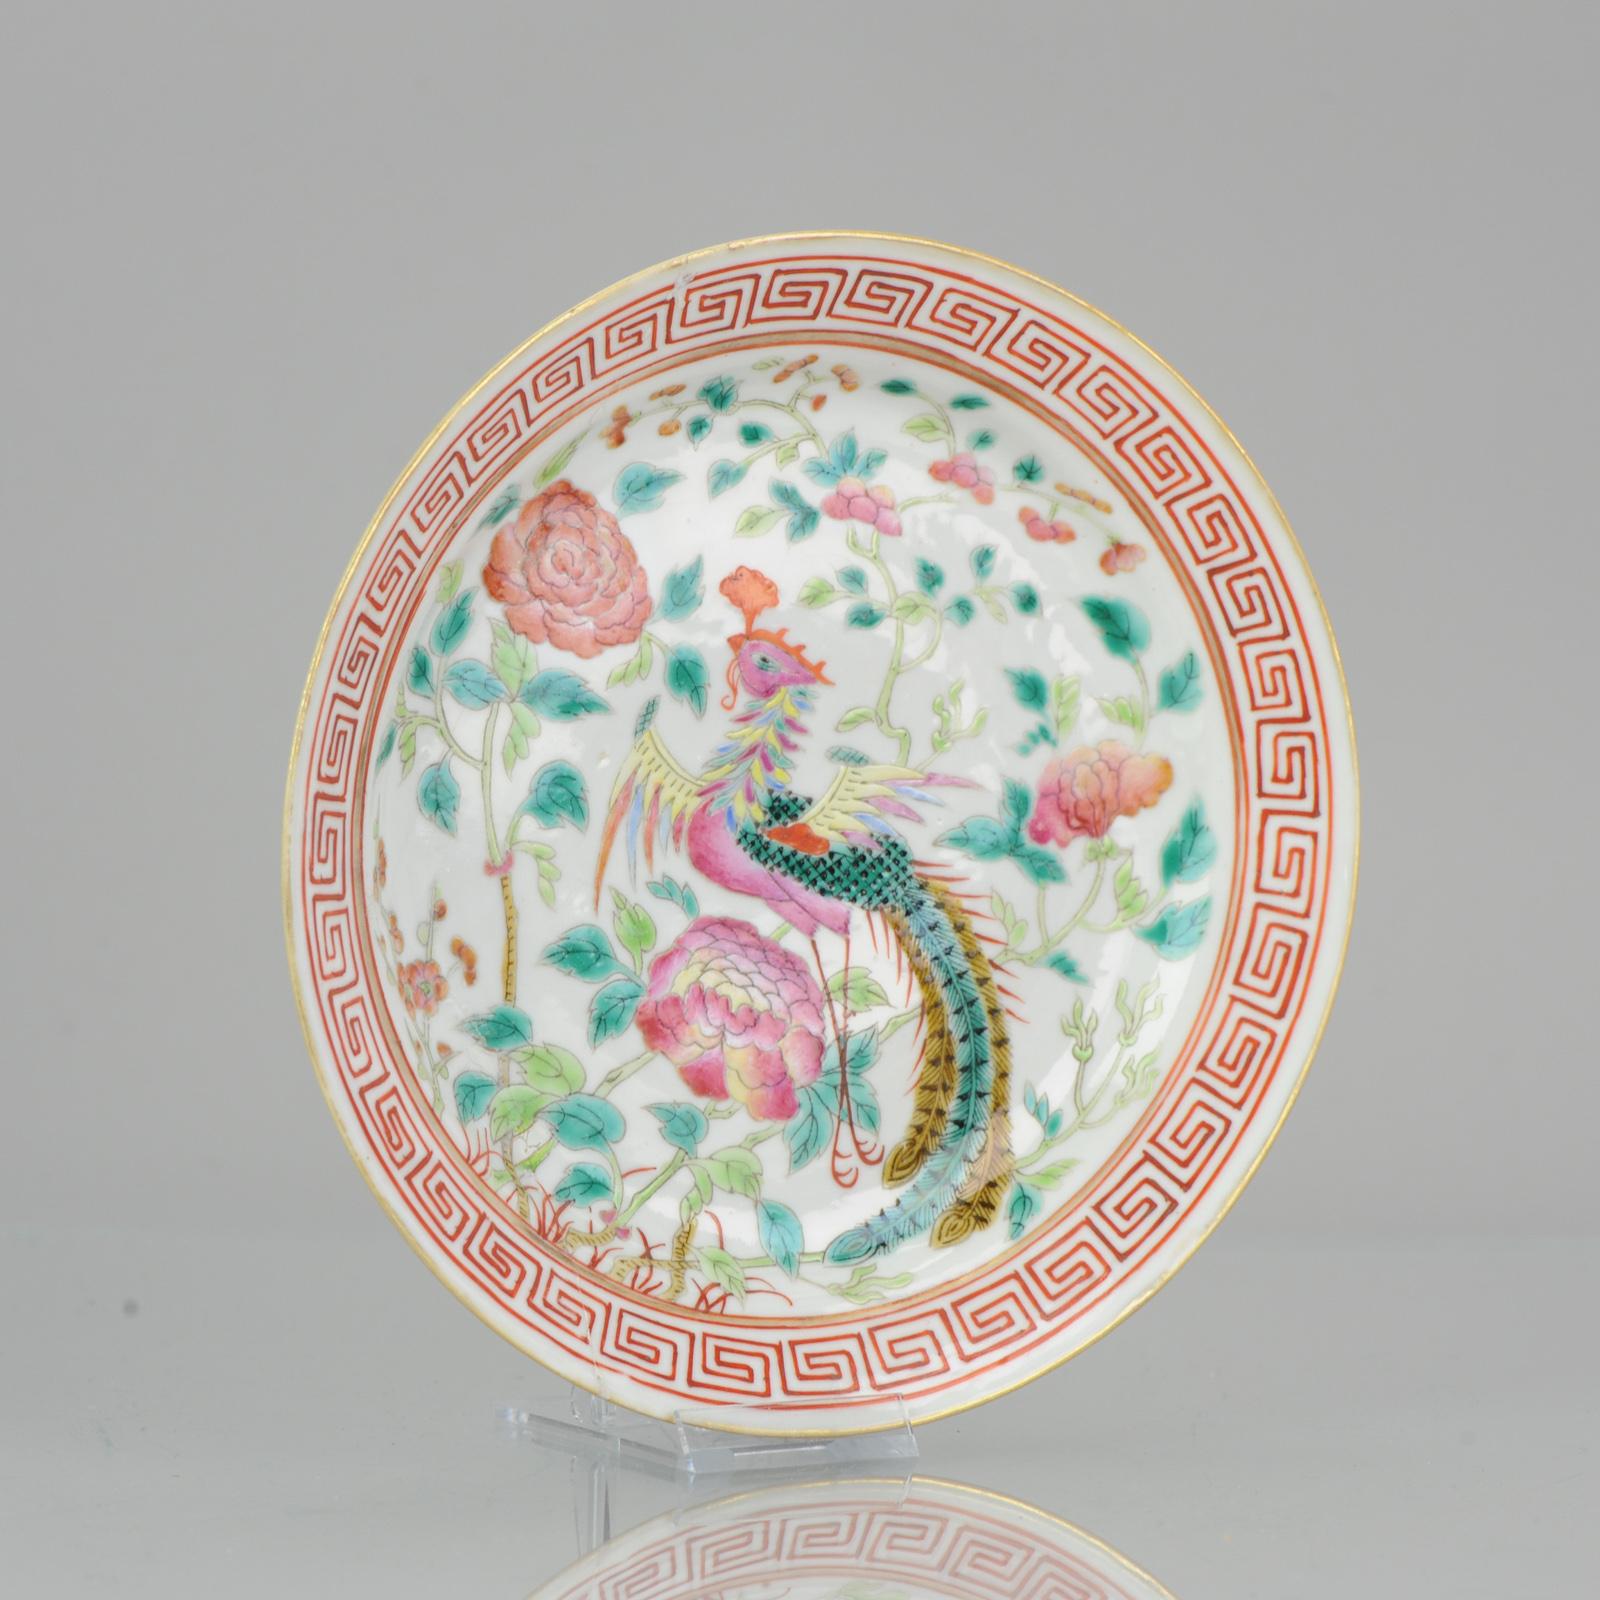 Beautiful Chinese porcelain plate with a stunning colour and good quality painting. Made for the Straits Chinese market (Malaysia / Singapore). Marked at base.
Pictured and described in 